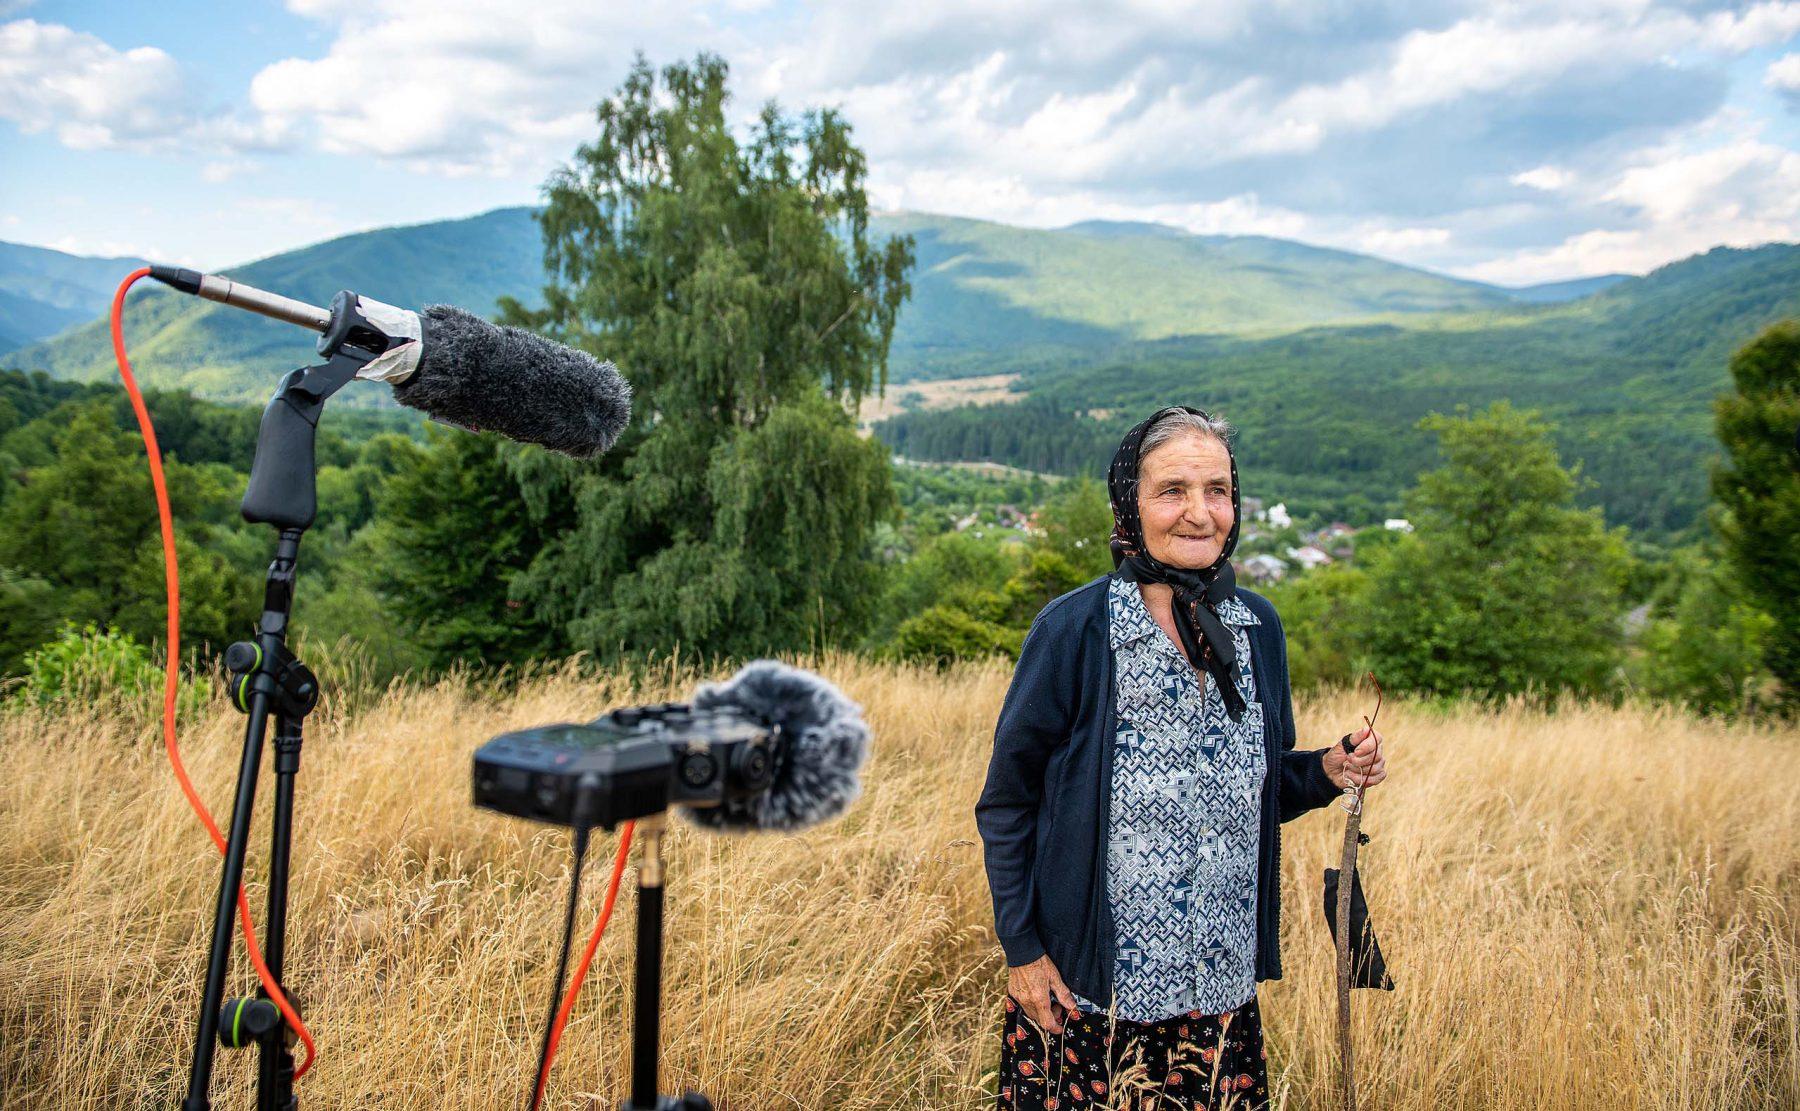 woman standing in a field with mountains in the background and recording equipment in front of her